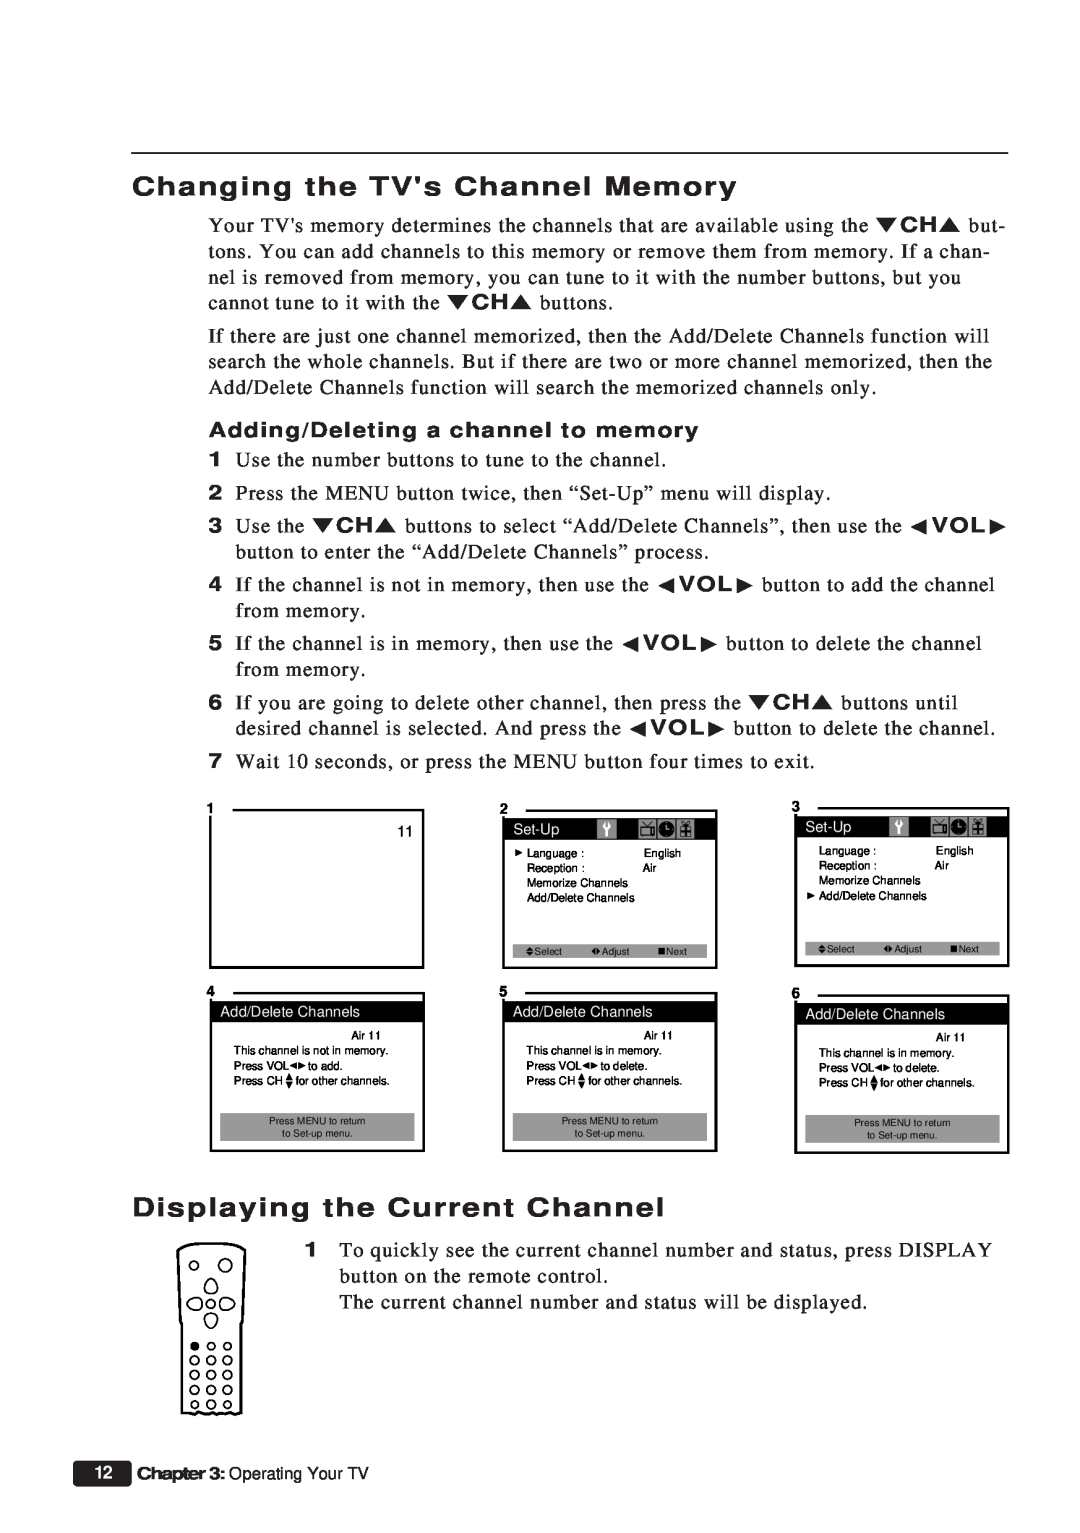 Daewoo ET 13P2 Changing the TVs Channel Memory, Displaying the Current Channel, Adding/Deleting a channel to memory 